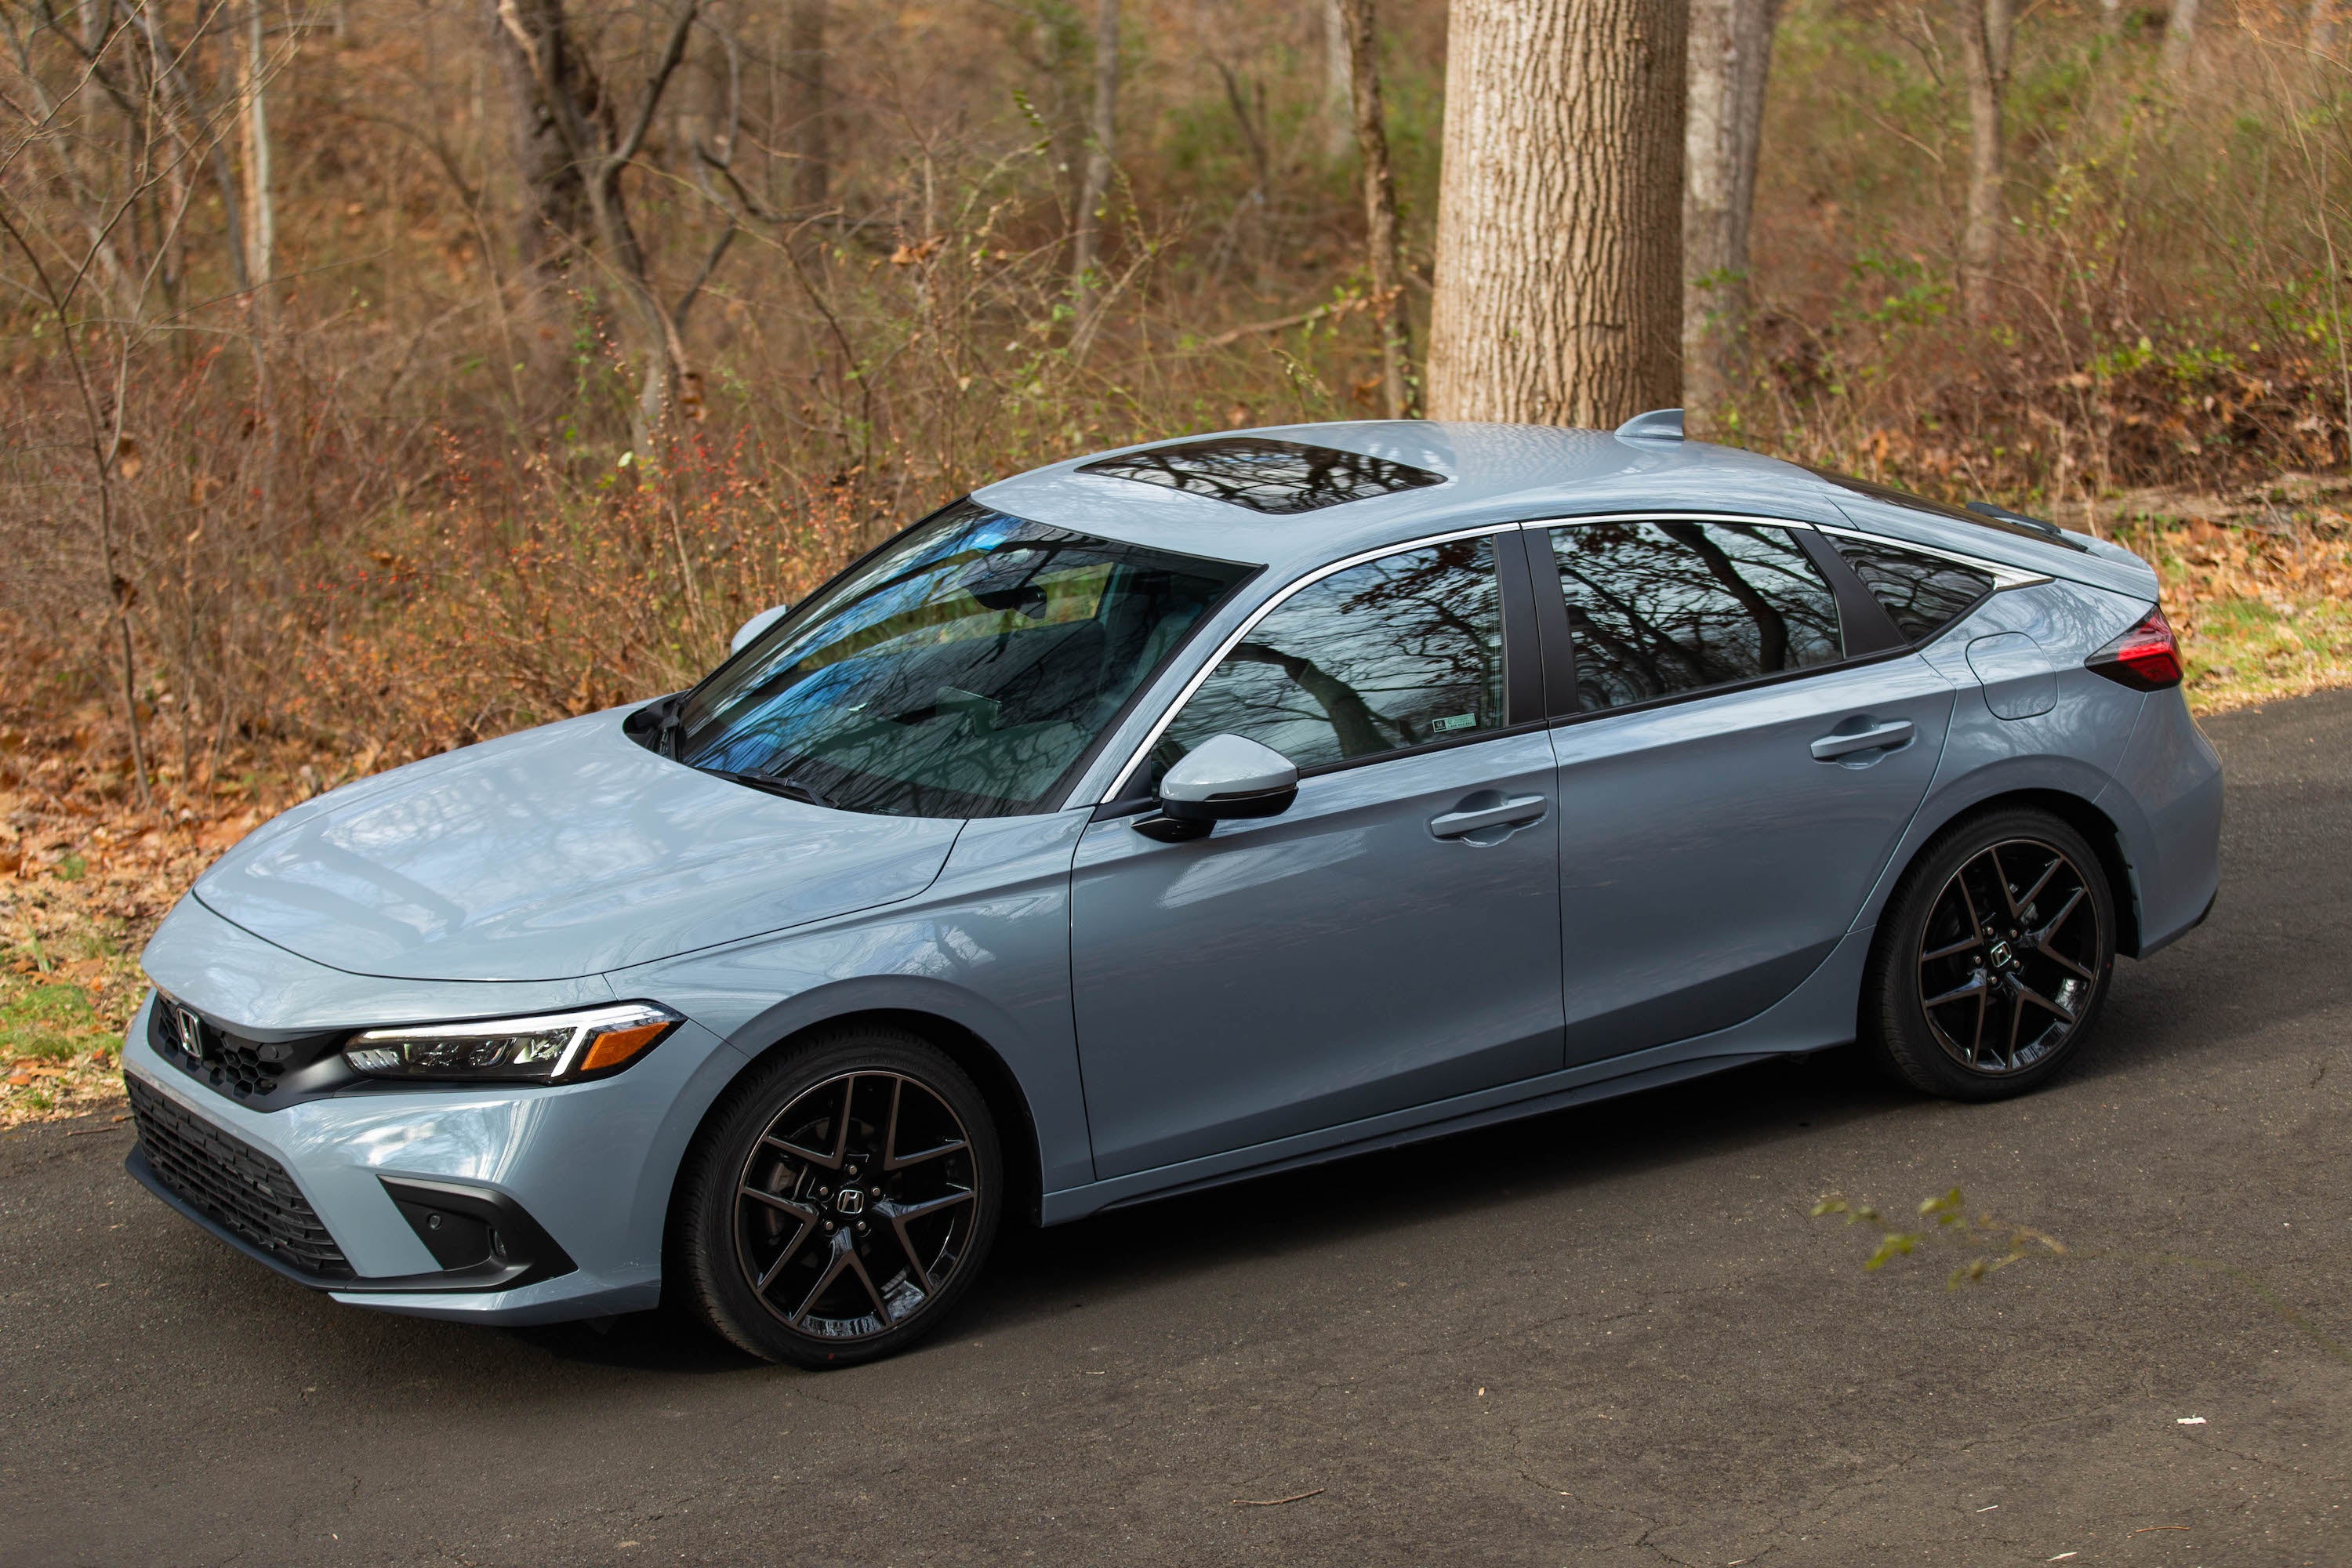 2022 Honda Civic Hatchback Review: Undefeated Compact Practicality